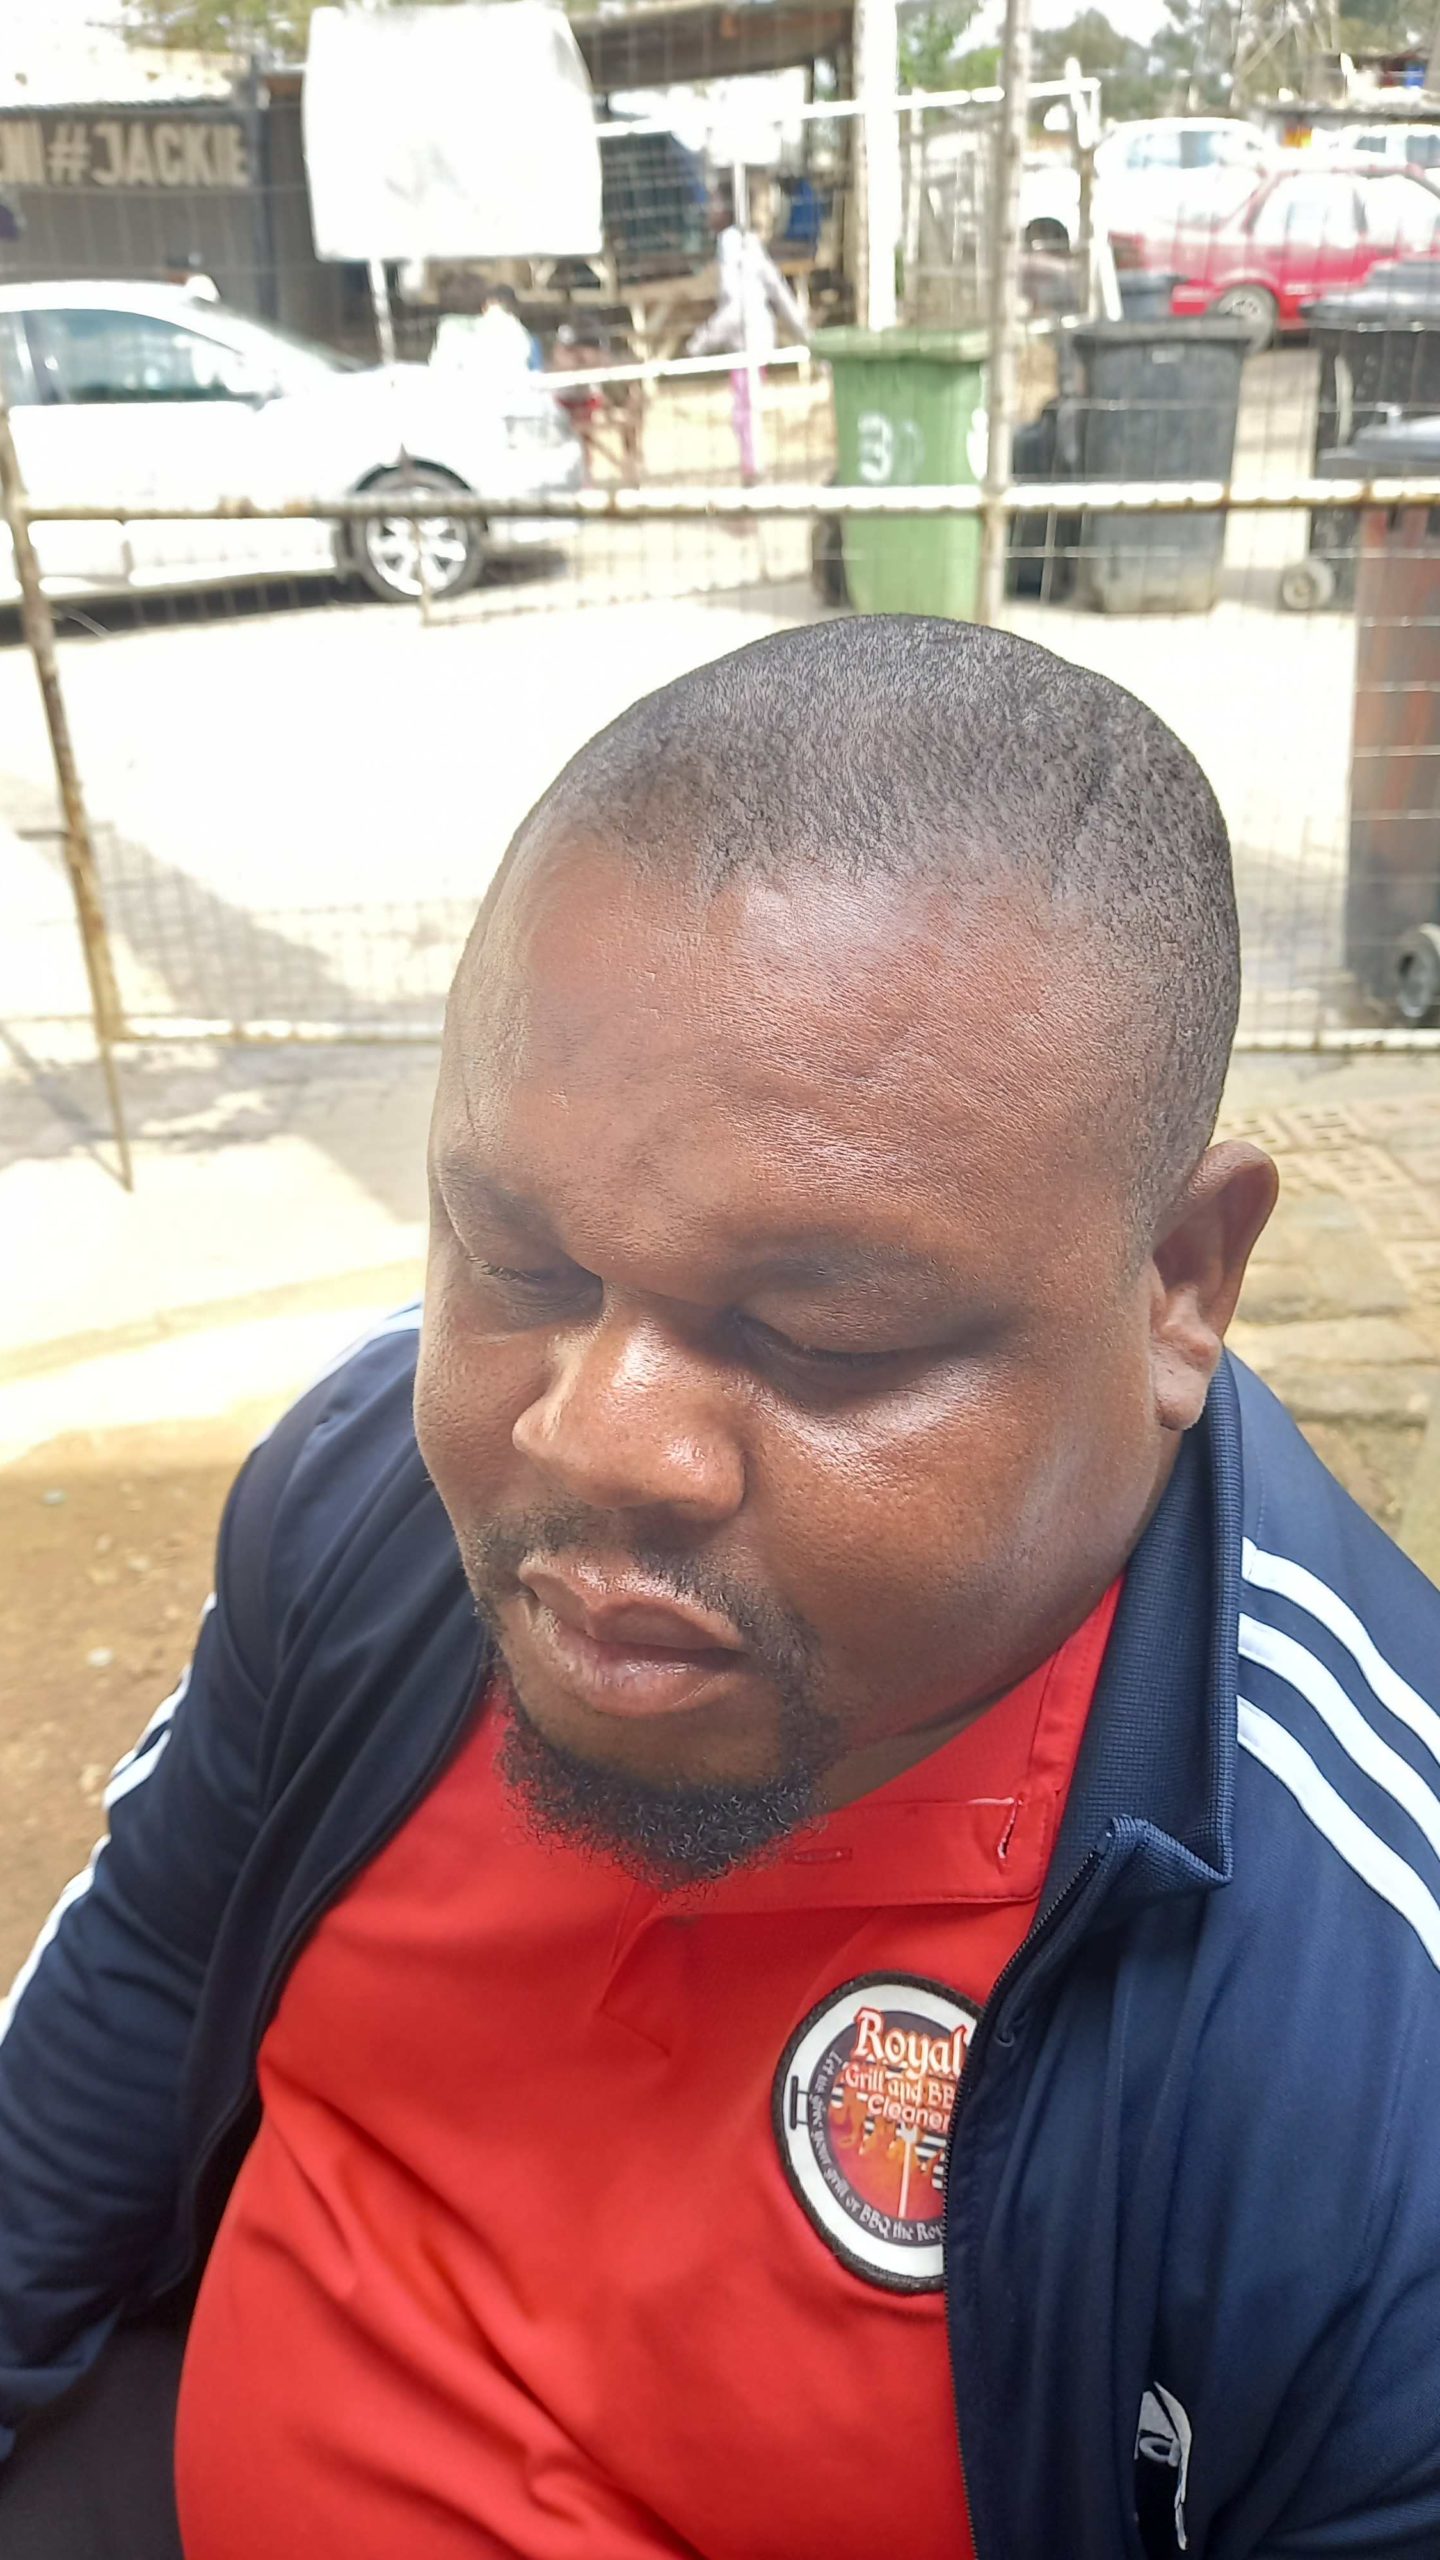 ‘Rodney died on my chest and the shooter thought I was dead too’, said Nkuna, Alex patroller